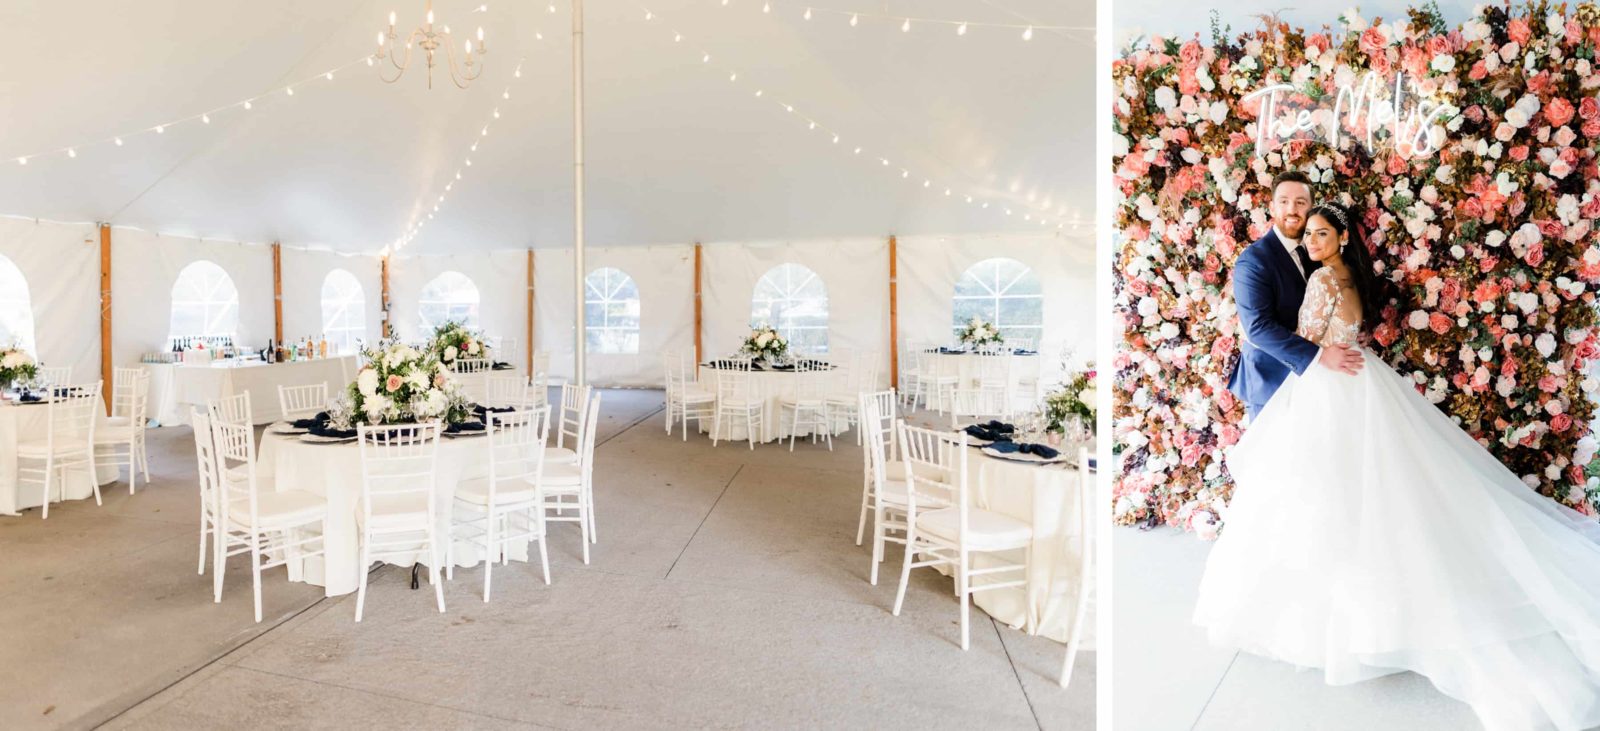 Brecknock Hall tent reception decoration and flower wall